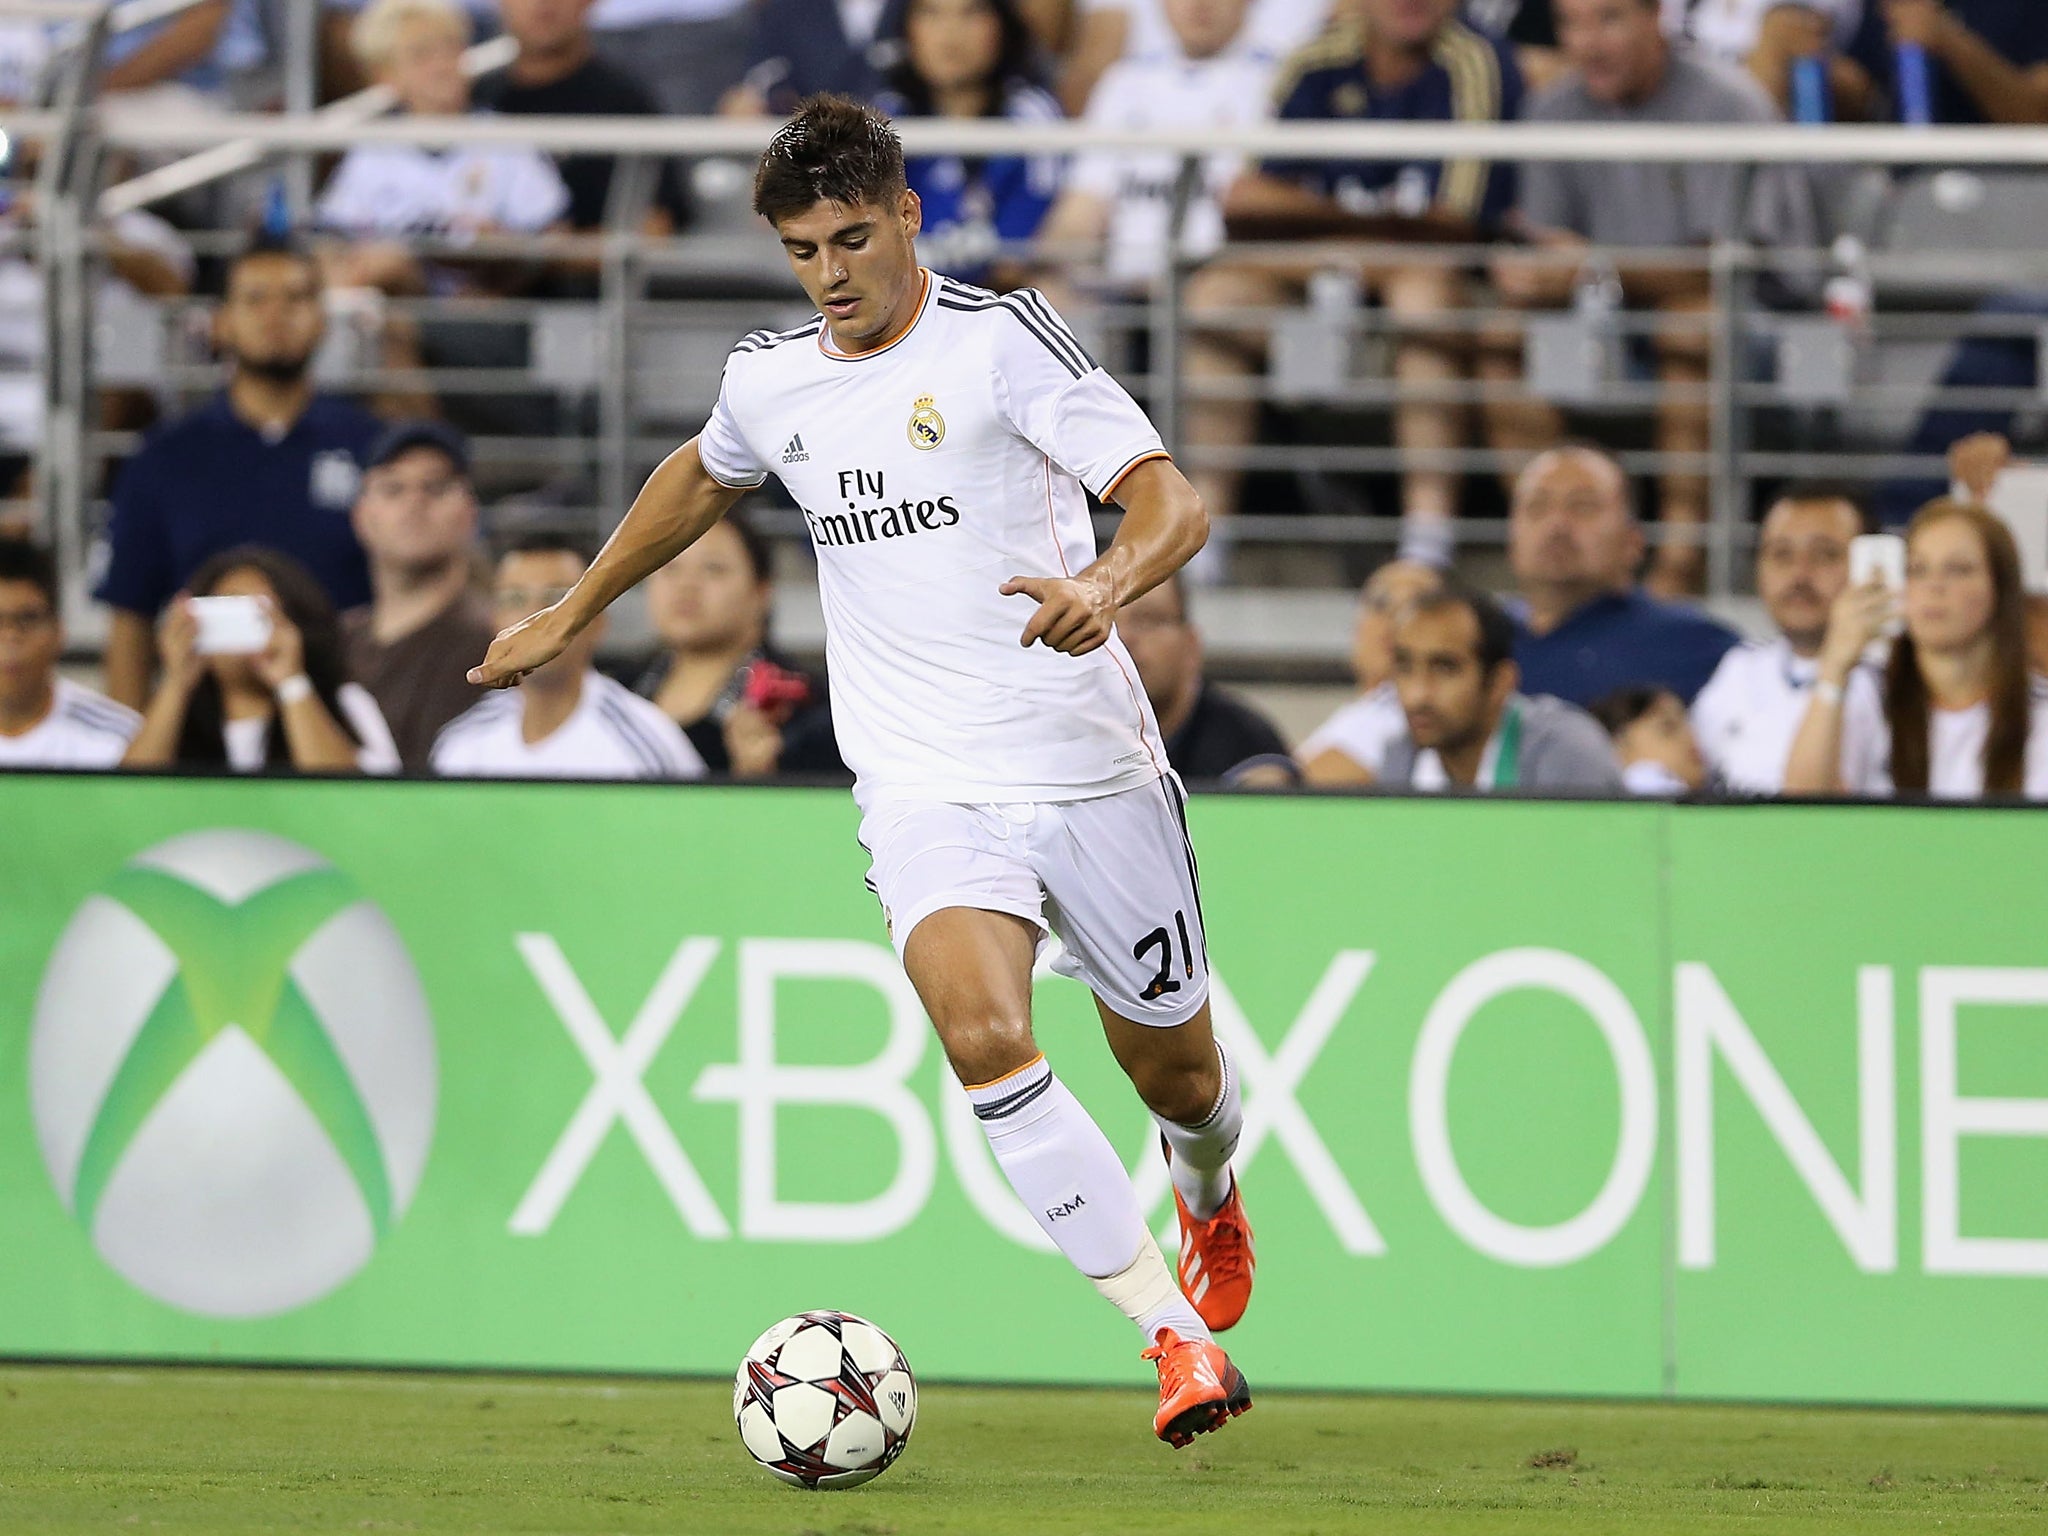 Real Madrid striker Alvaro Morata could be on his way to Arsenal after reports suggested the clubs have agreed a six-month loan deal